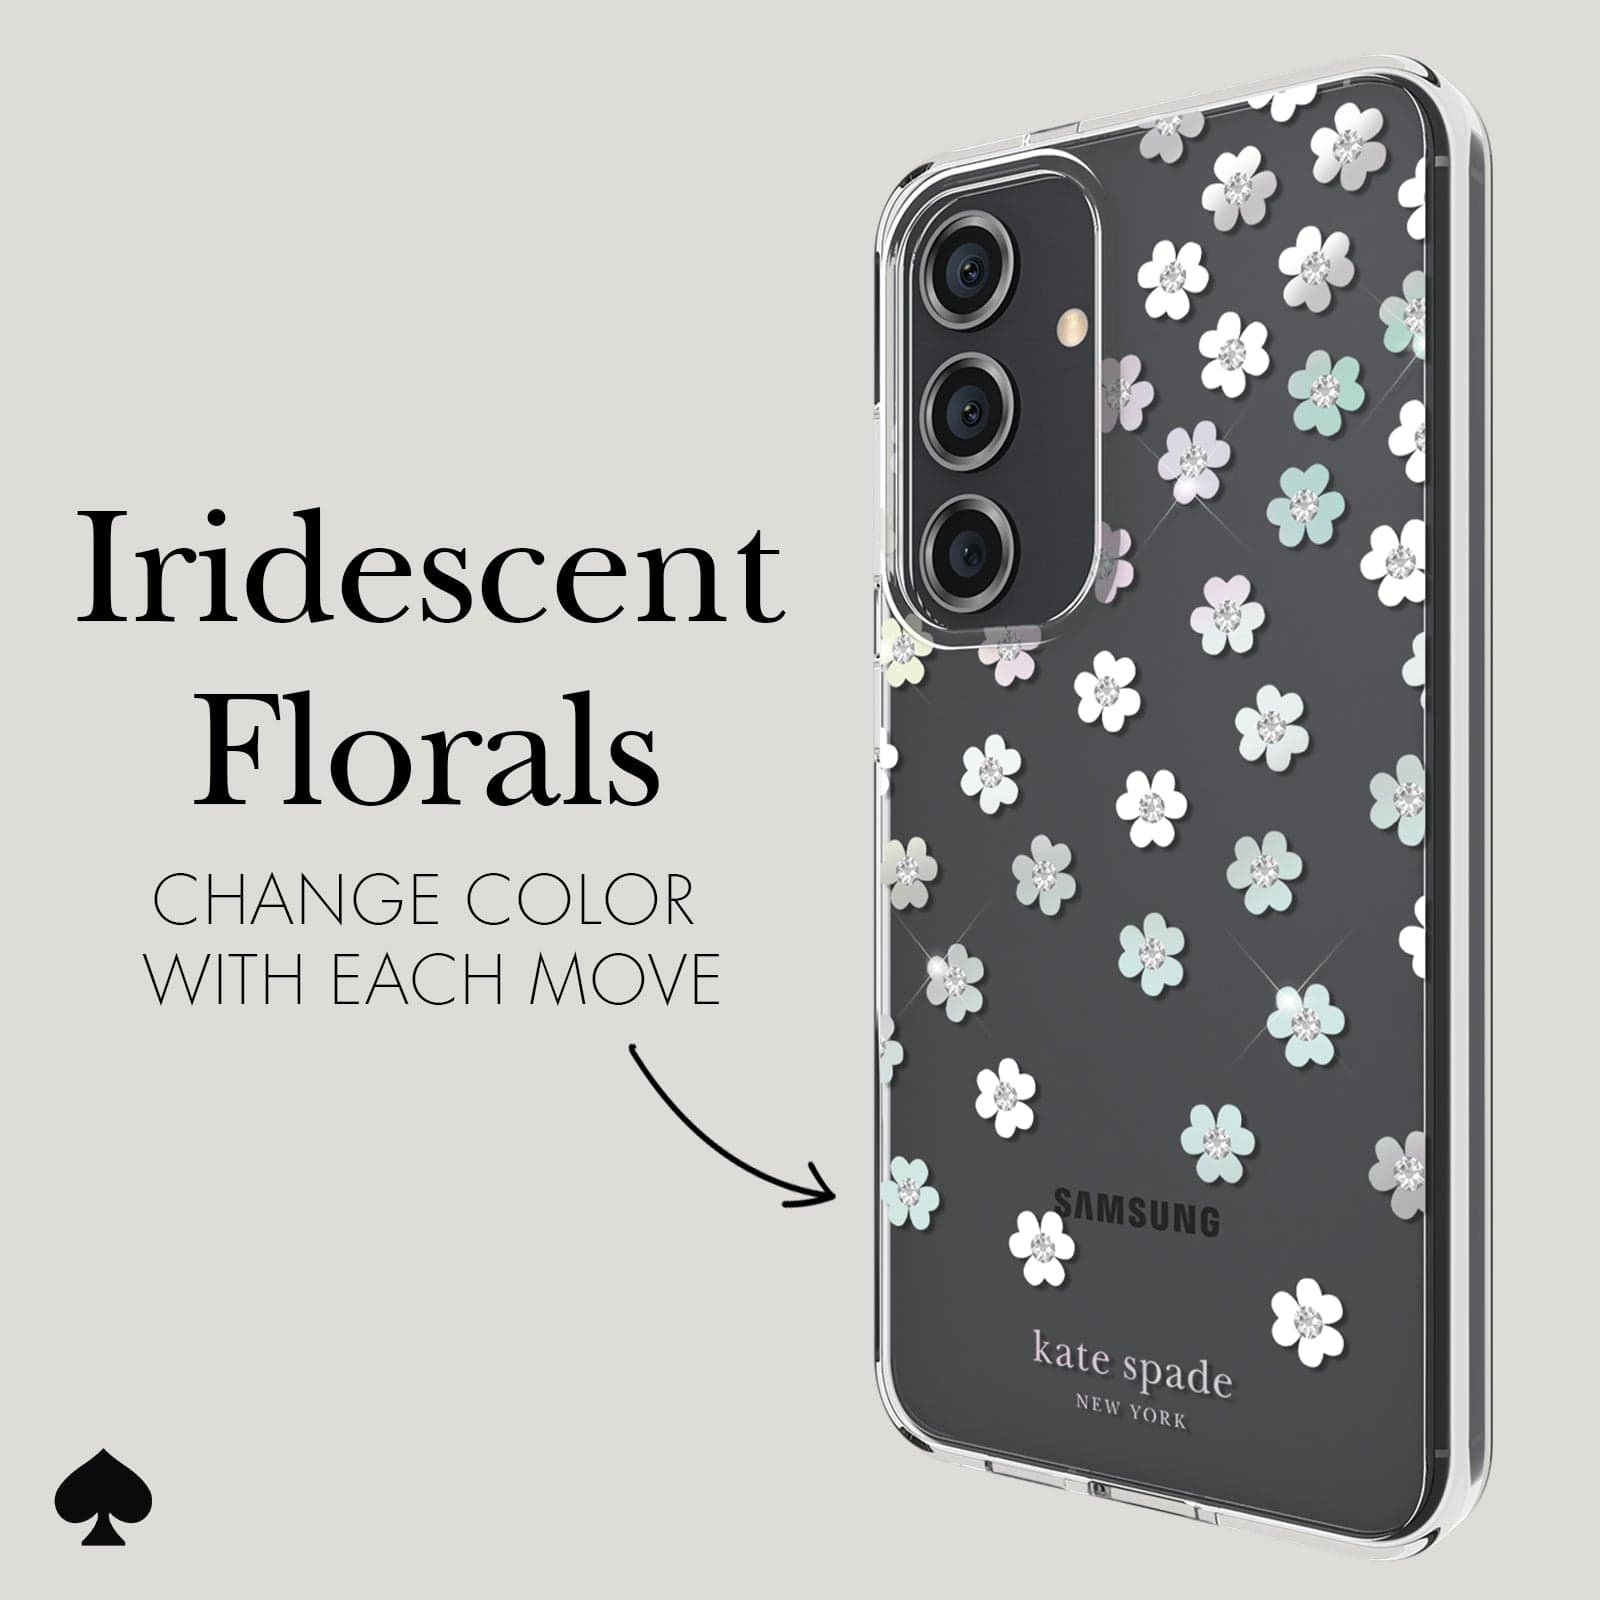 IRIDESCENT FLORALS CHANGE COLOR WITH EACH MOVE